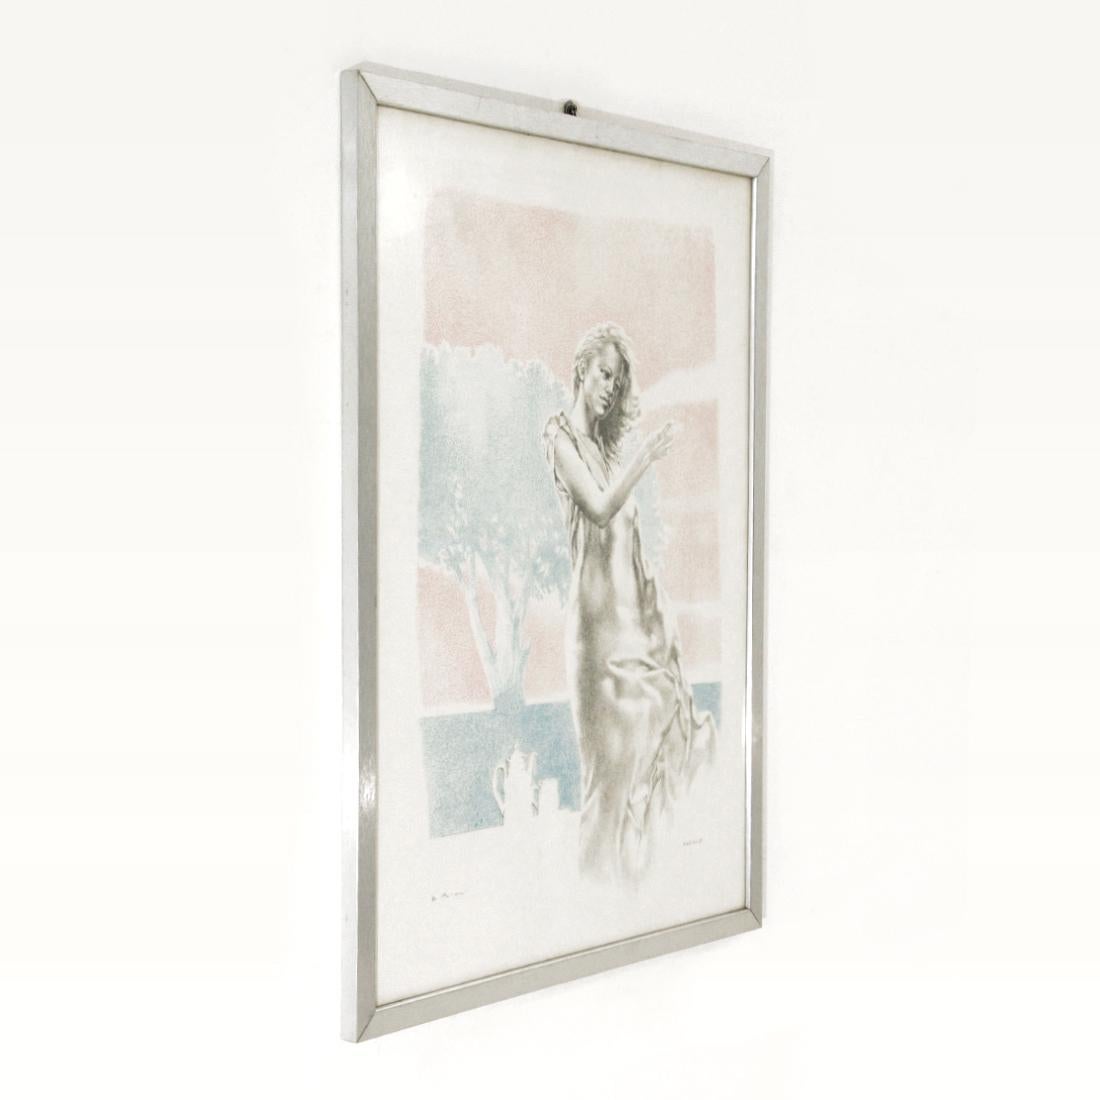 Painting executed by the master Giampaolo Parini in the 1980s.
Mixed media on paper.
Signed and dated lower right.
Brushed metal frame.
Good general conditions.

Dimensions: Length 53 cm, depth 2 cm, height 73 cm.